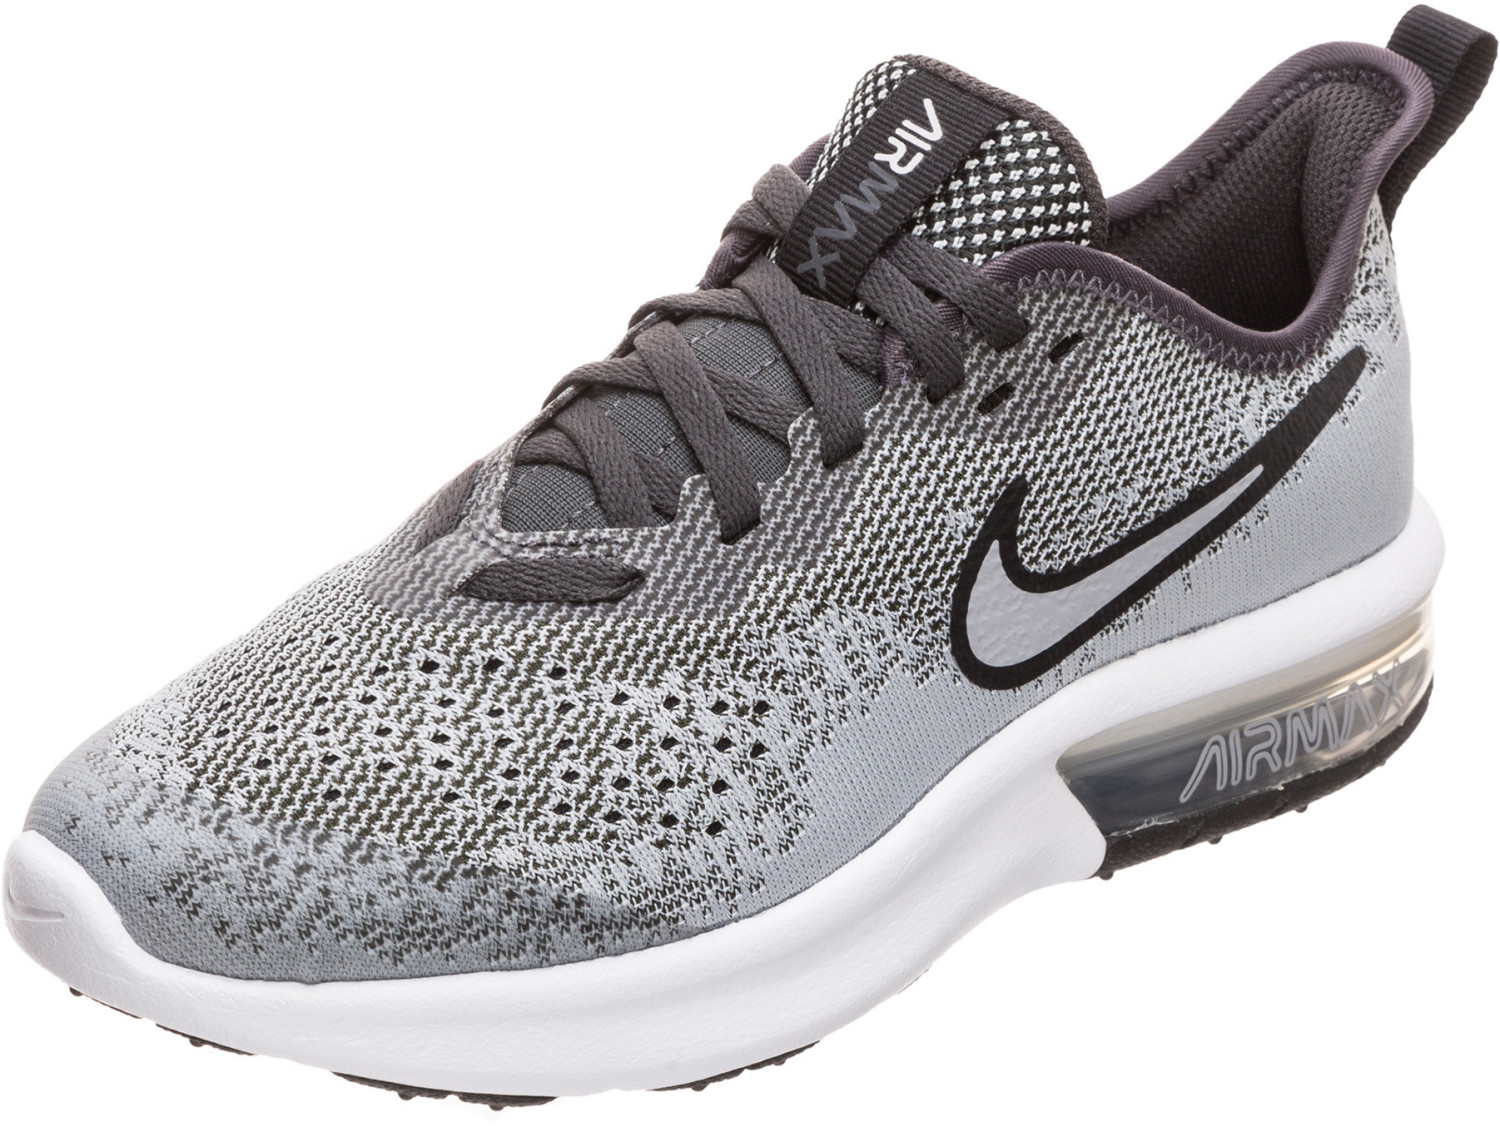 Nike Air Max Sequent 4 GS (AQ2244) wolf grey/wolf grey/anthracite/white